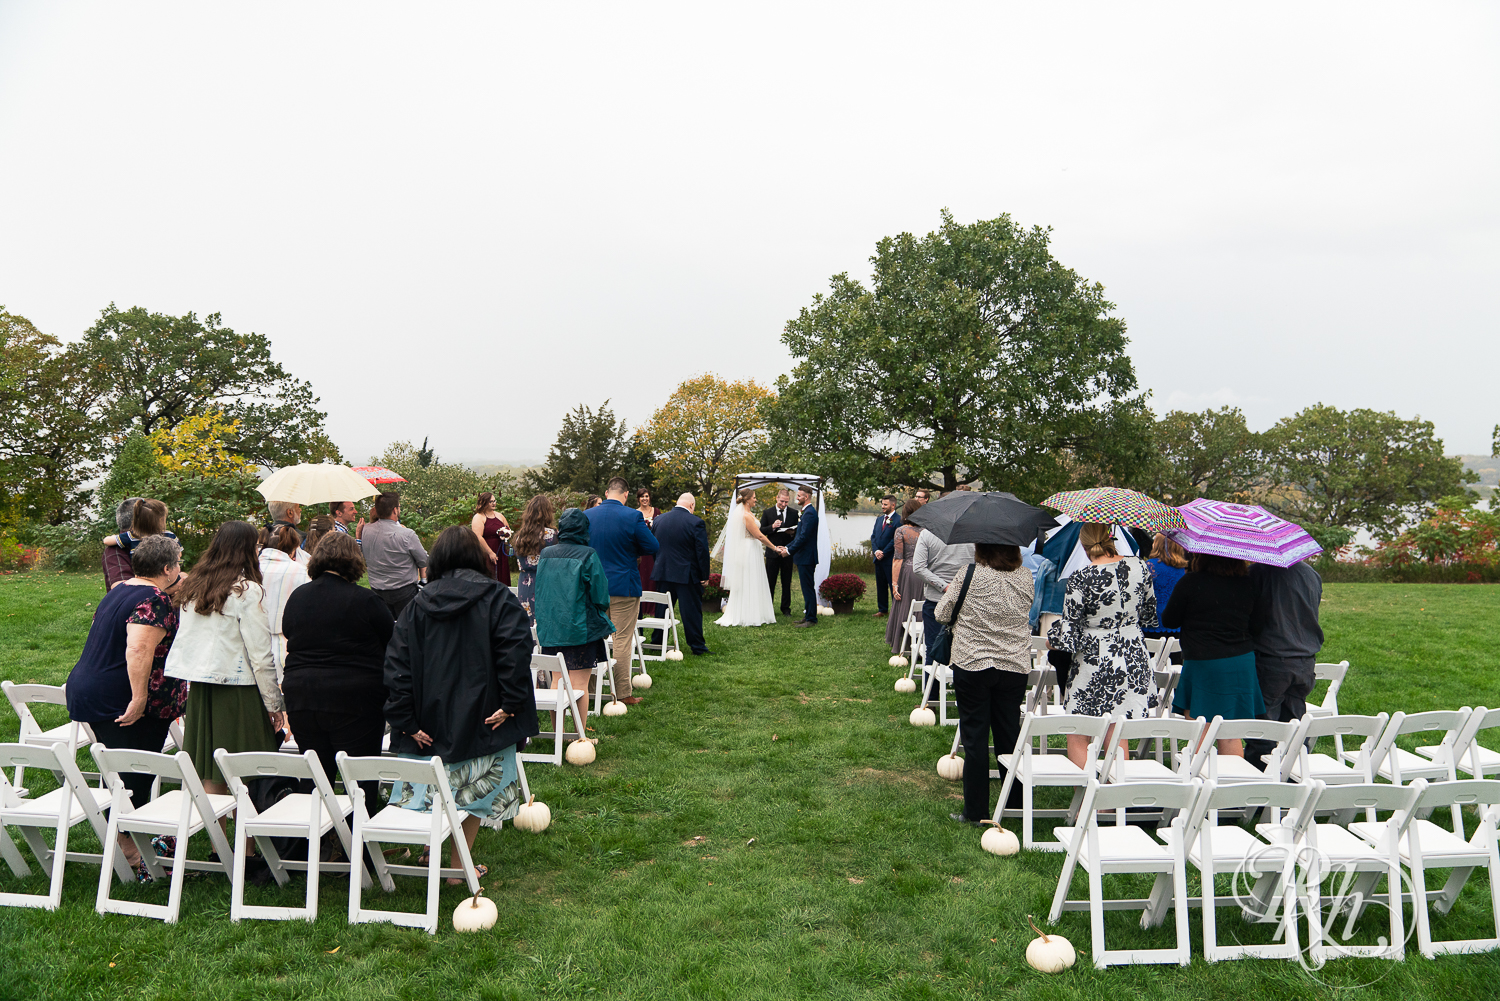 Bride and groom standing at alter at rainy wedding ceremony at Schaar's Bluff in Hastings, Minnesota. 